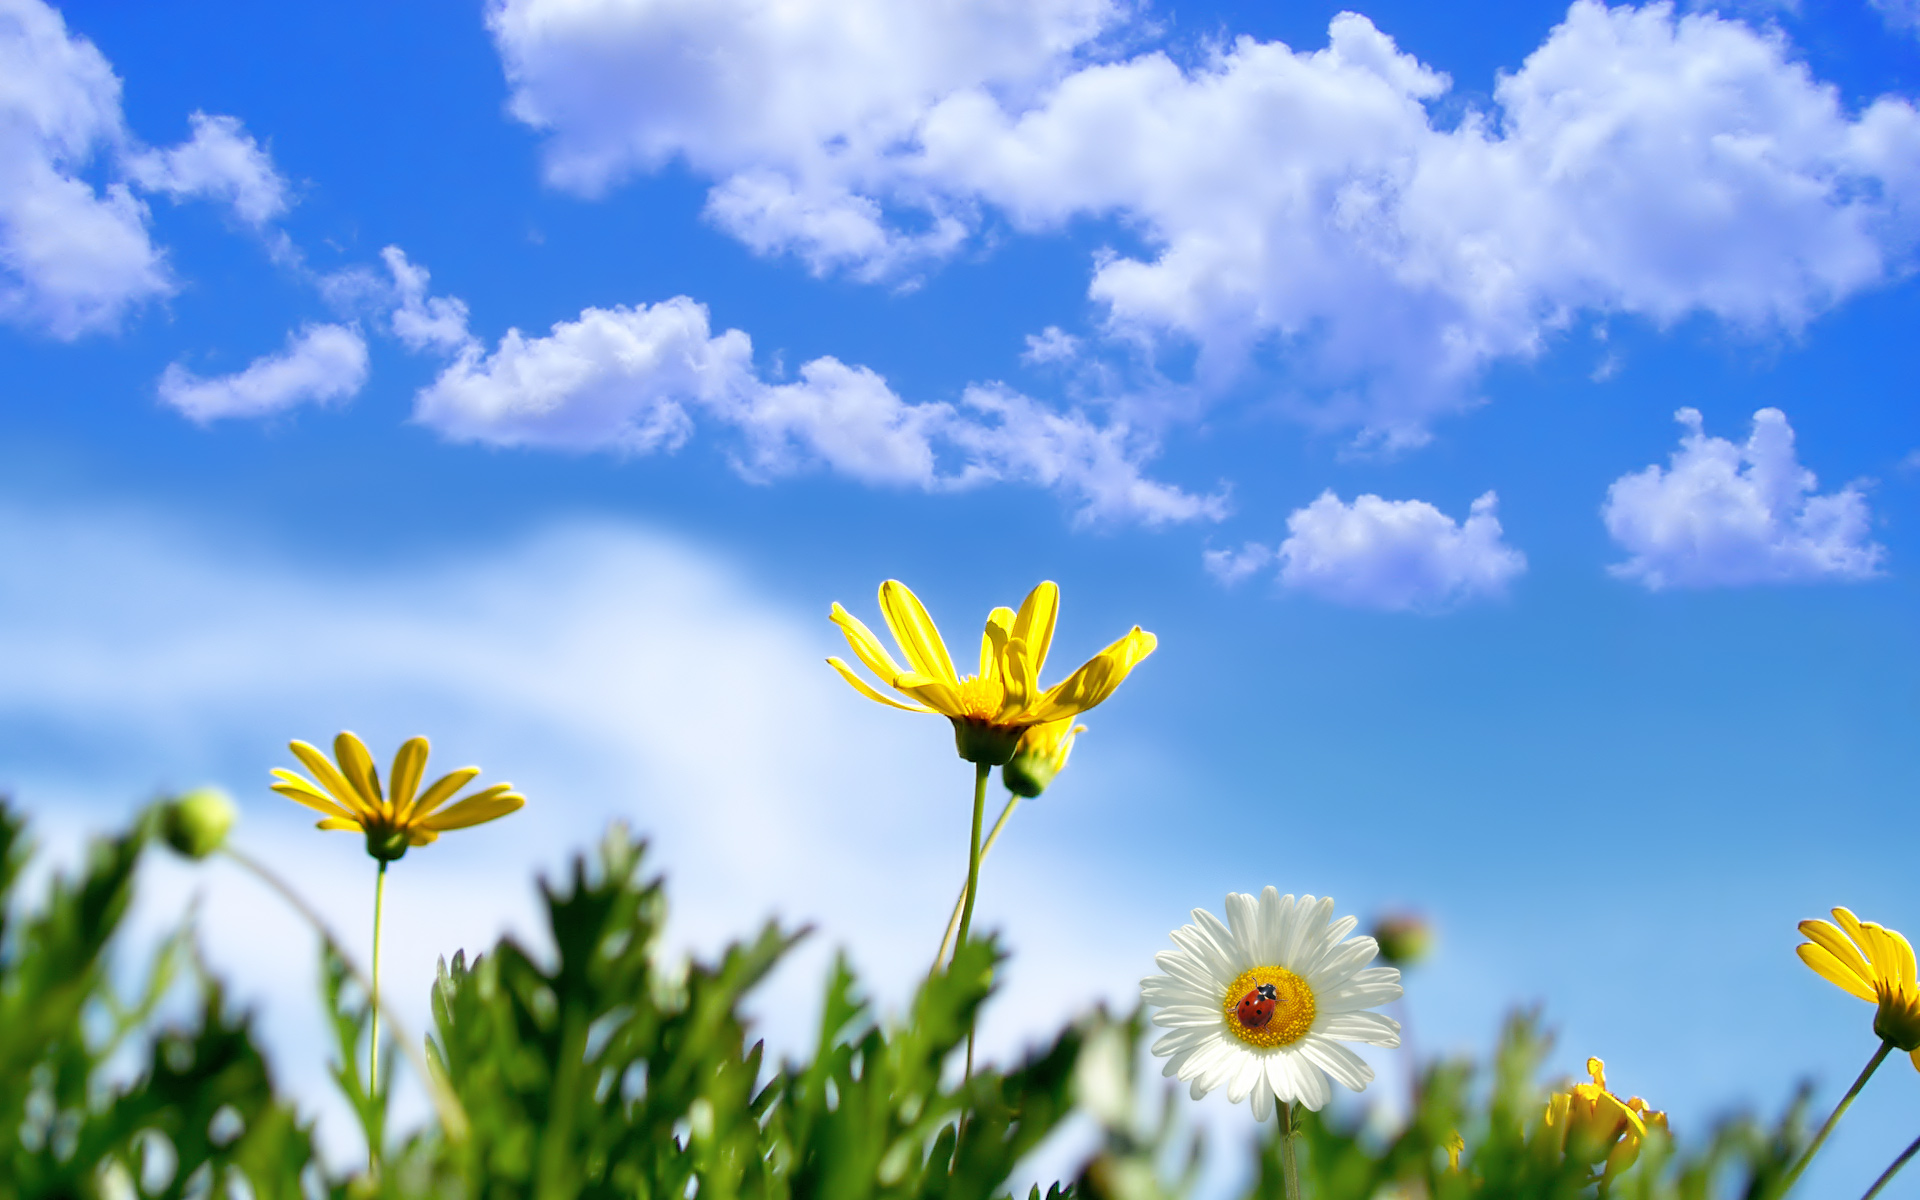 Scenery Wallpaper Shows Sunny Springtime Keep Spring All